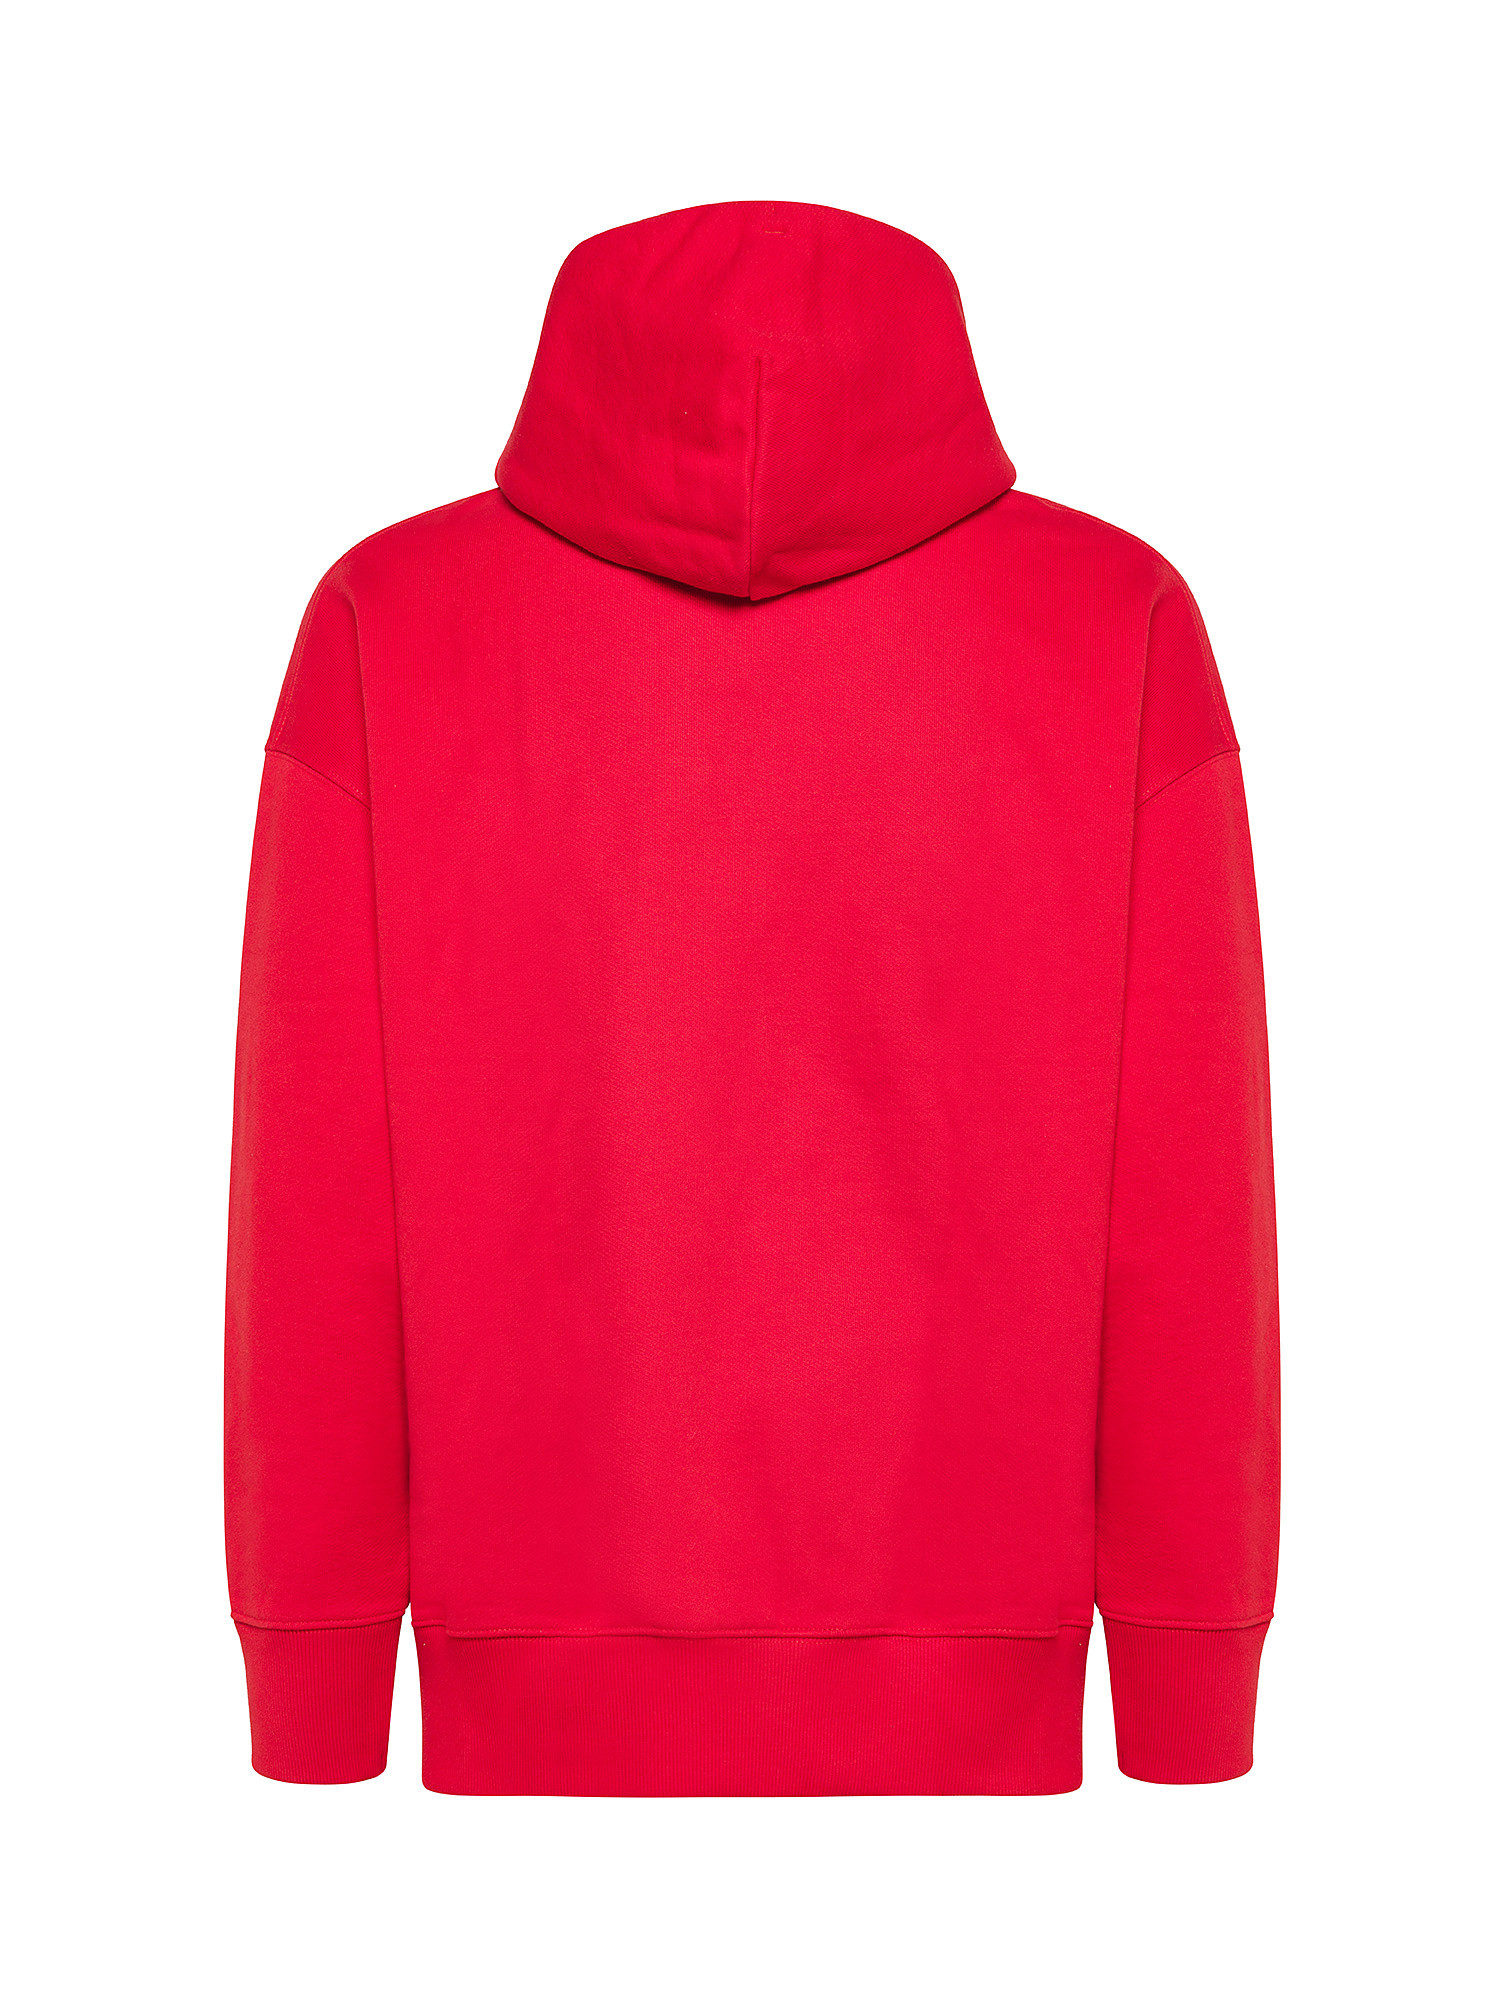 Tommy Jeans - Cotton hooded sweatshirt with micrologo on the front, Red, large image number 1